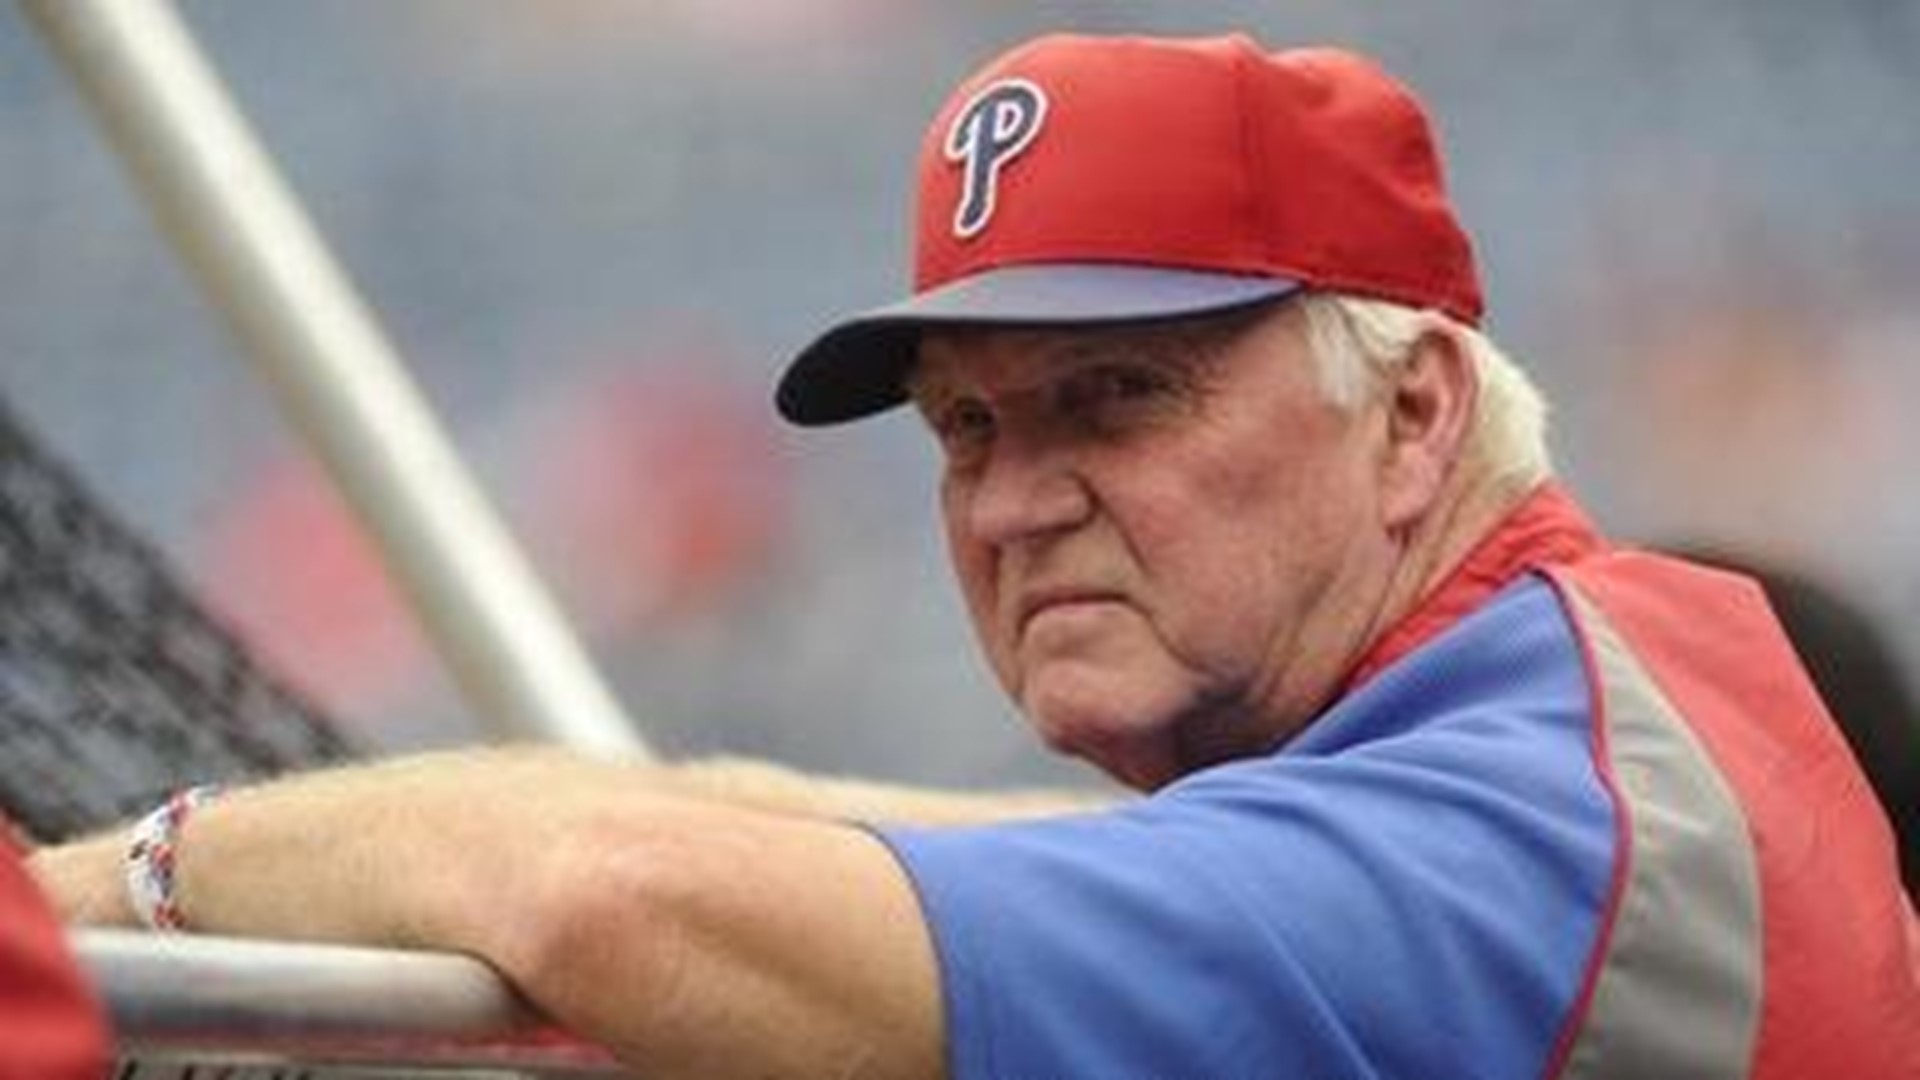 Charlie Manuel, the manager of the World Series-winning 2008 Phillies team, joined us on FOX43 Morning News to discuss this year's squad.